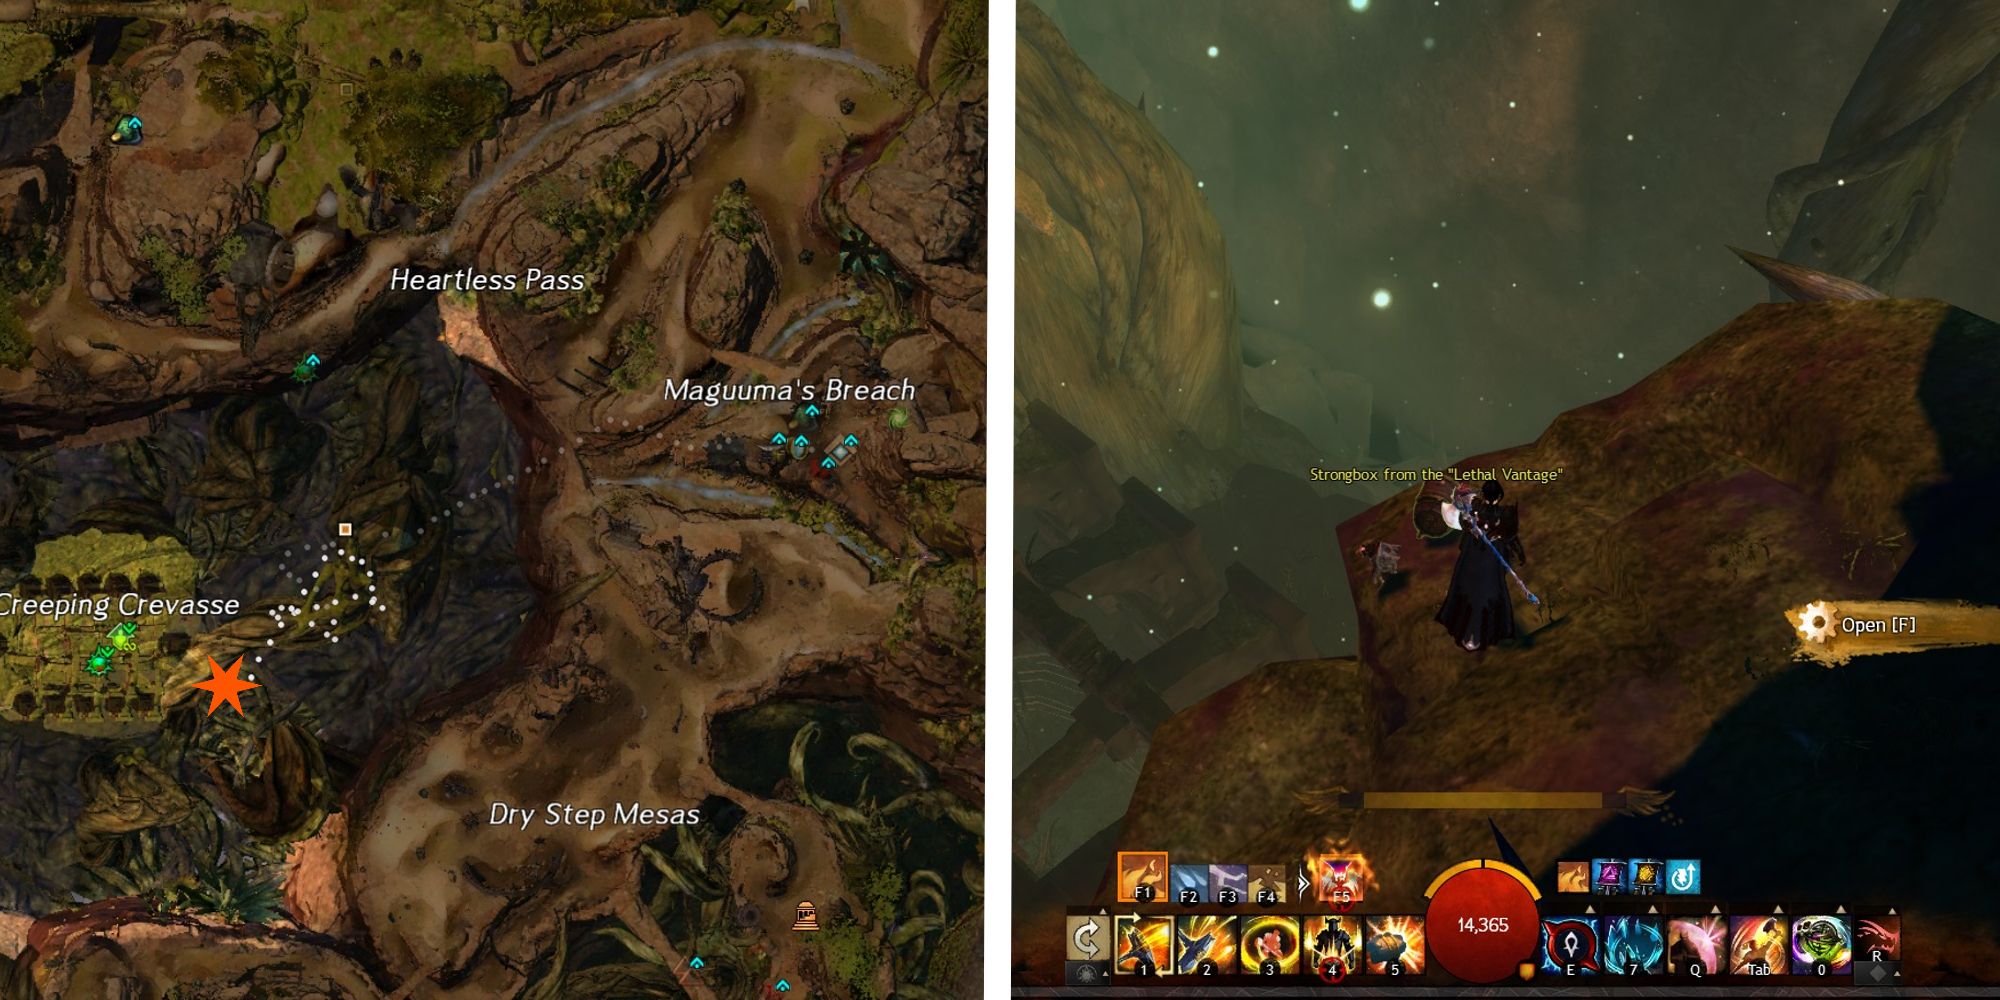 map of lethal vantage strongbox location, next to image of player opening box